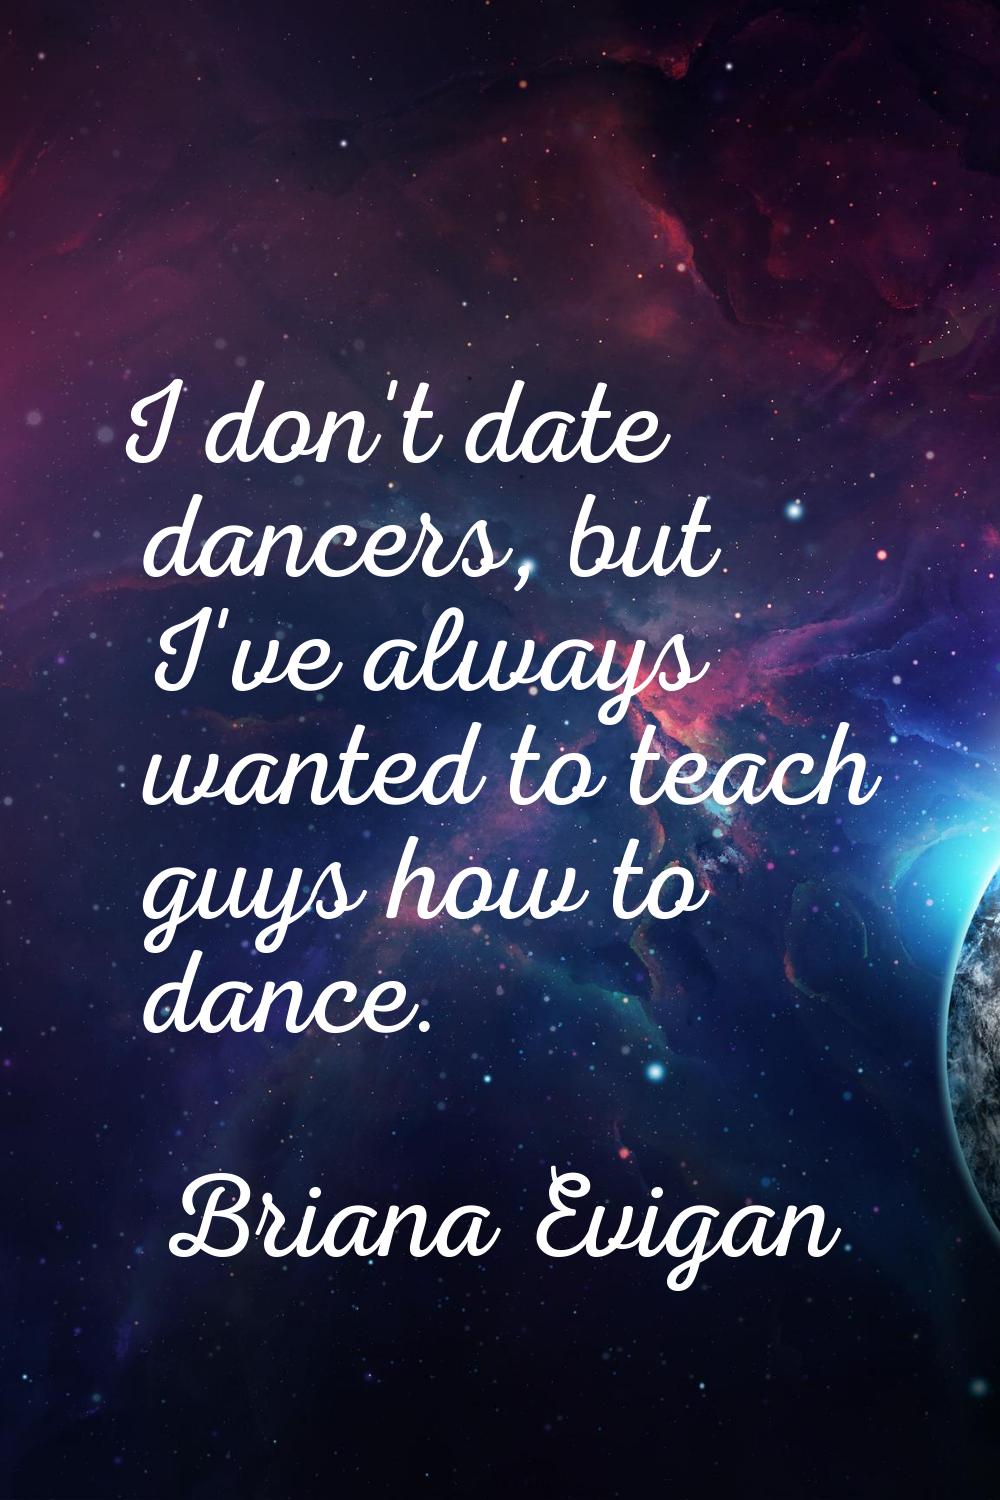 I don't date dancers, but I've always wanted to teach guys how to dance.